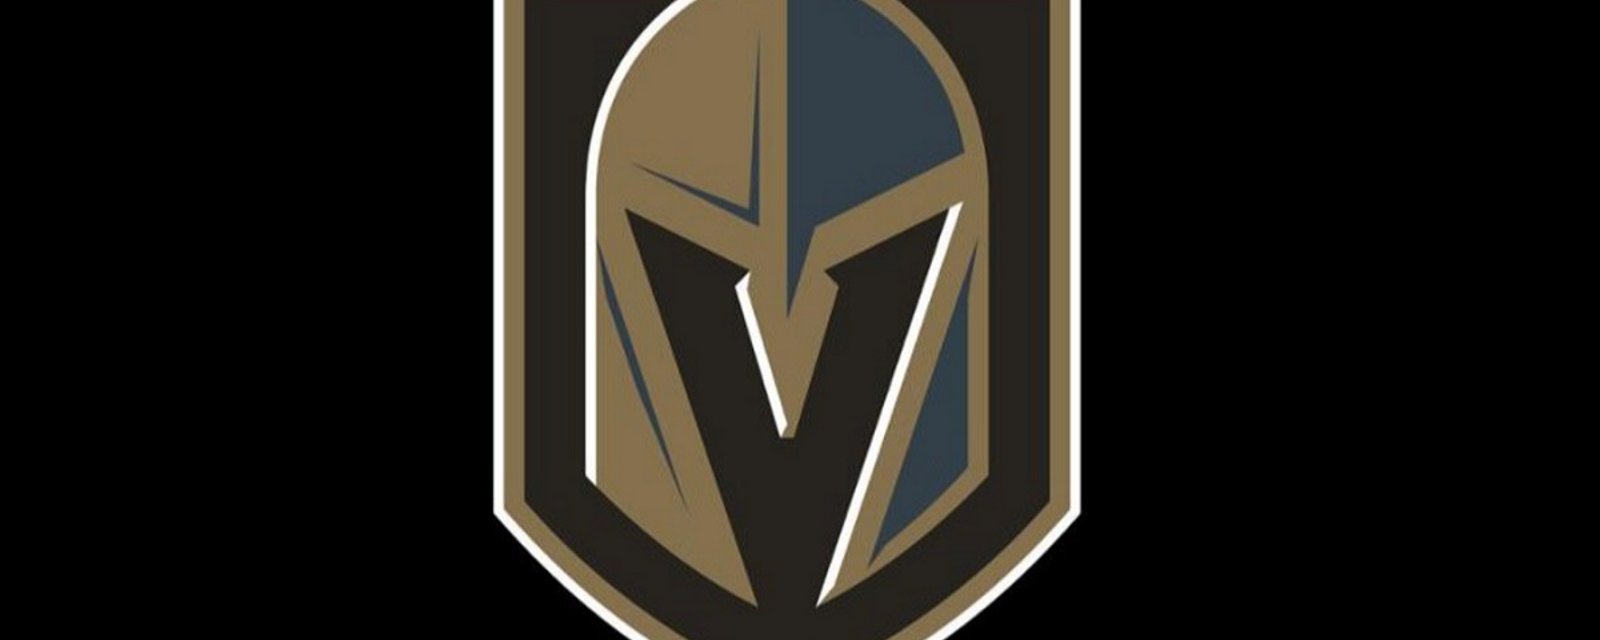 New NHL team is officially announced, including their new name and logo.